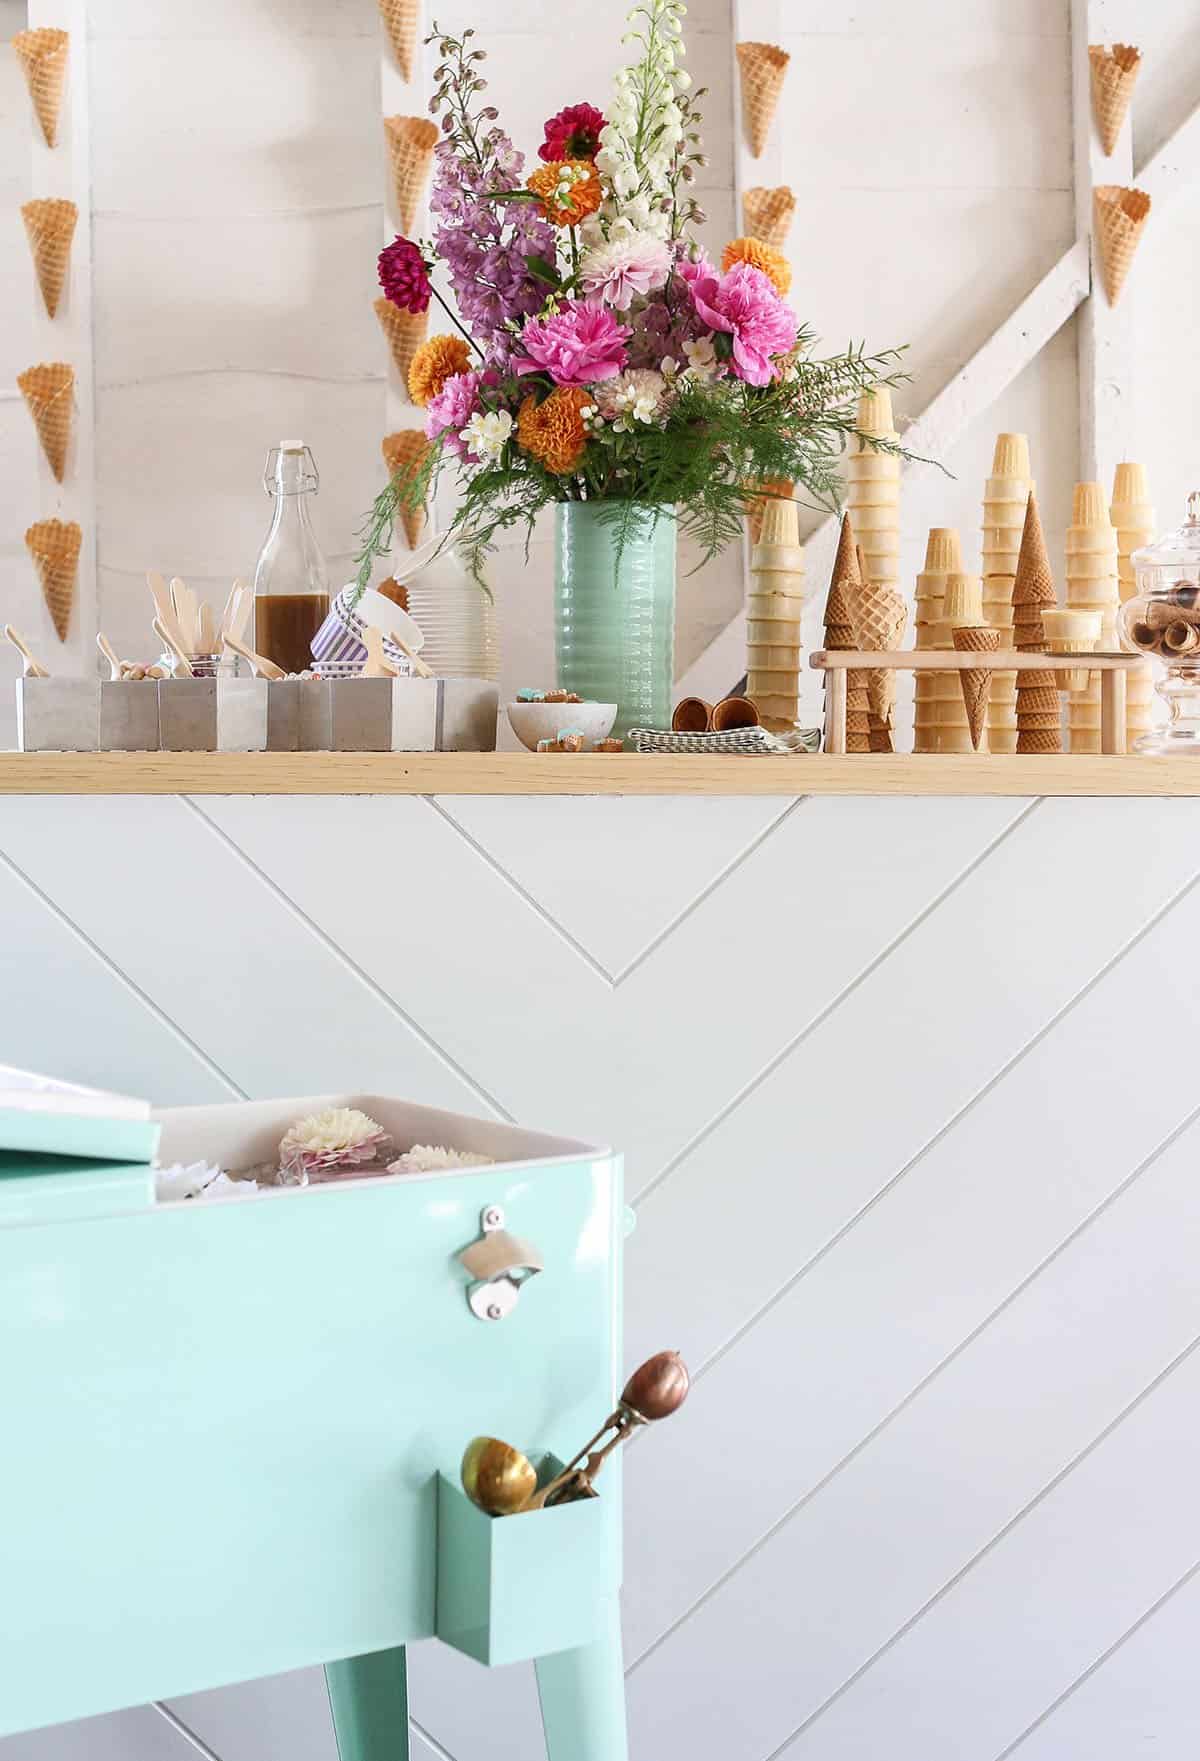 ice cream bar with pink flowers and a green cooler with ice cream tubs